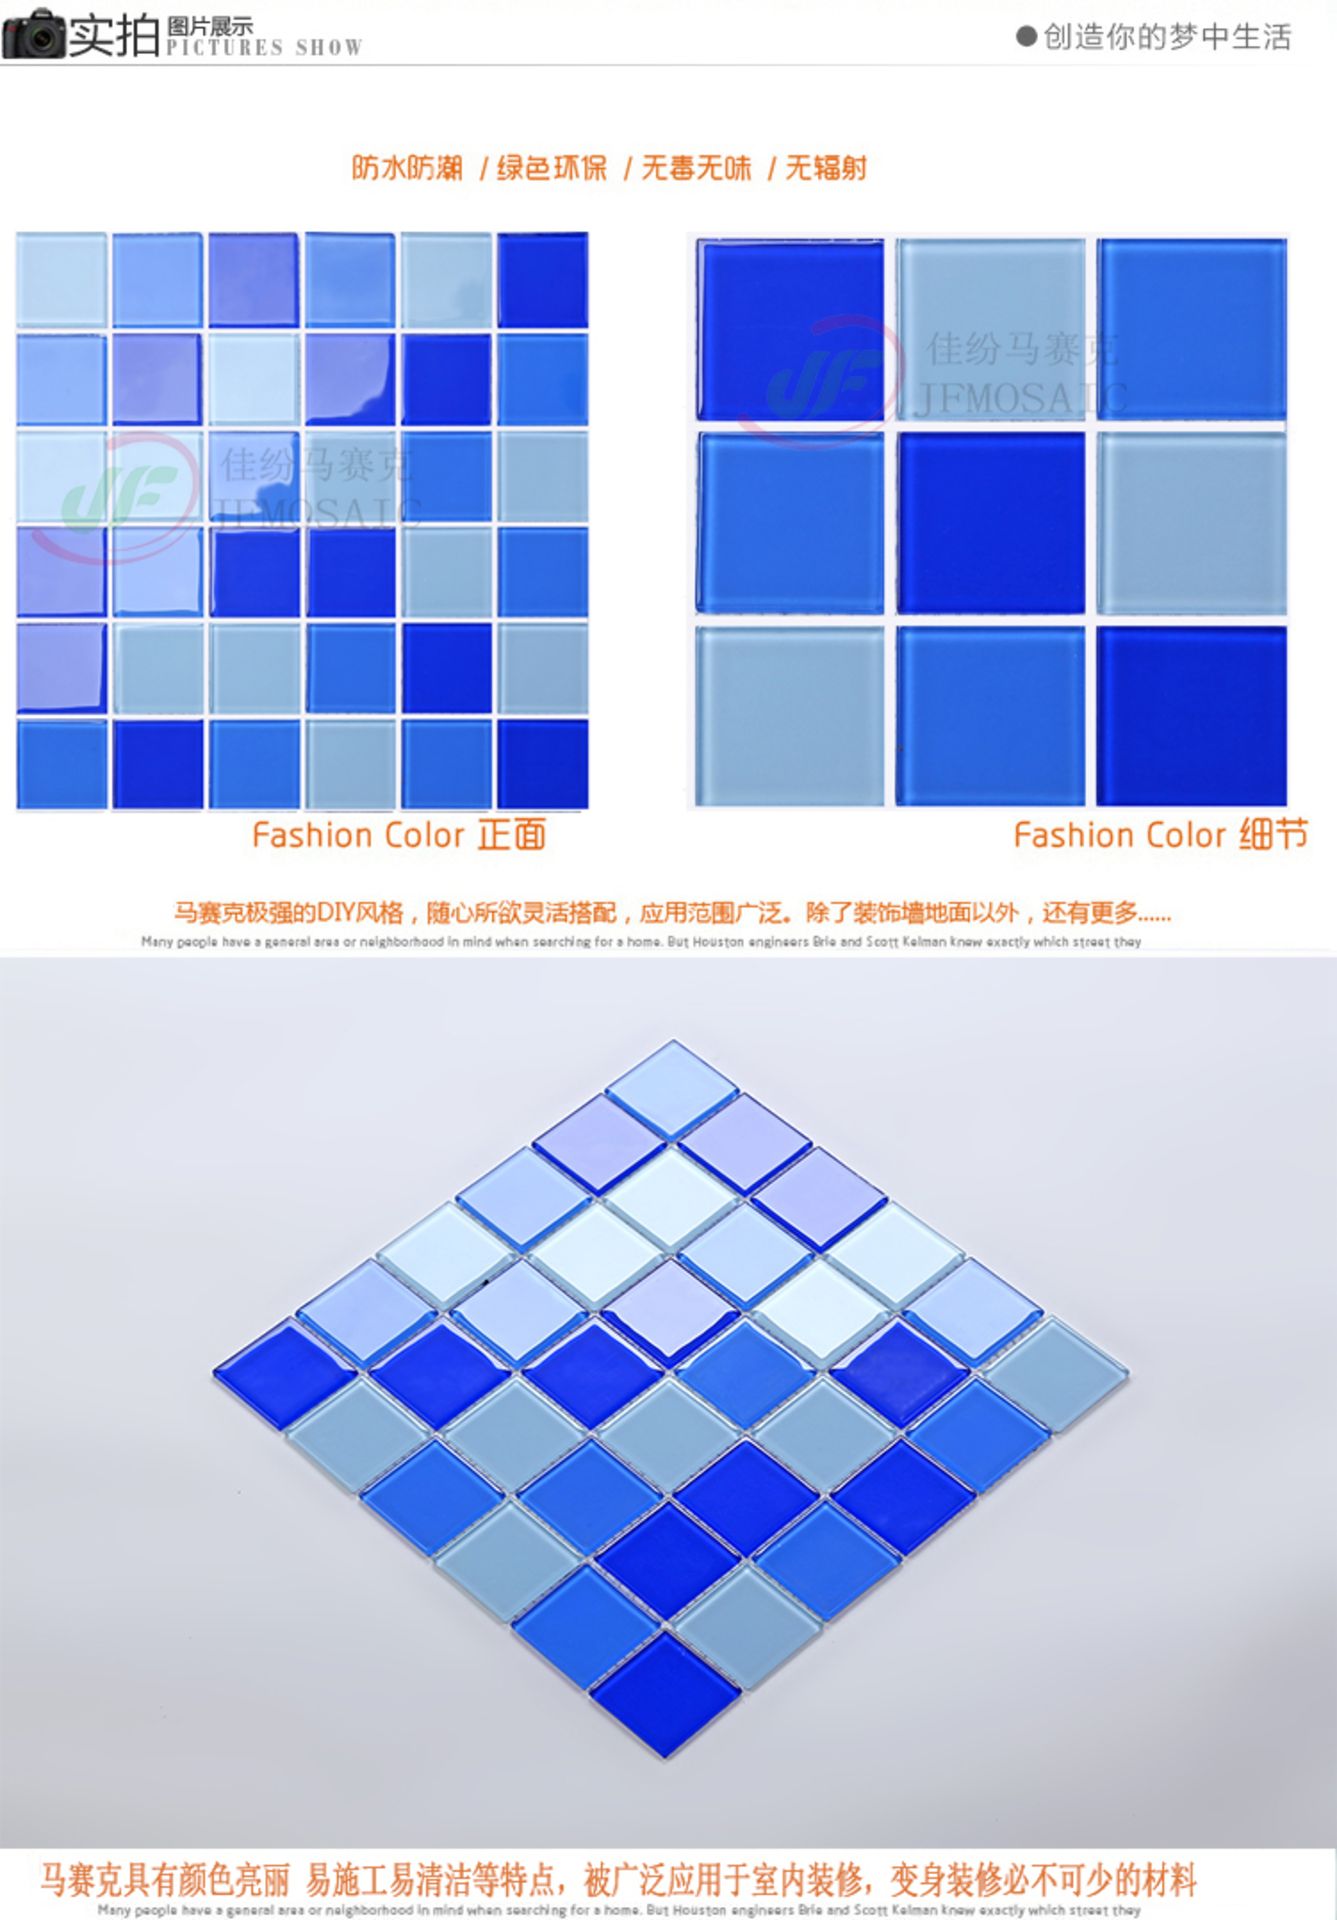 5 Square Metres - High Quality Glass/Stainless Steel Mosaic Tiles-55 Sheets - Image 2 of 2